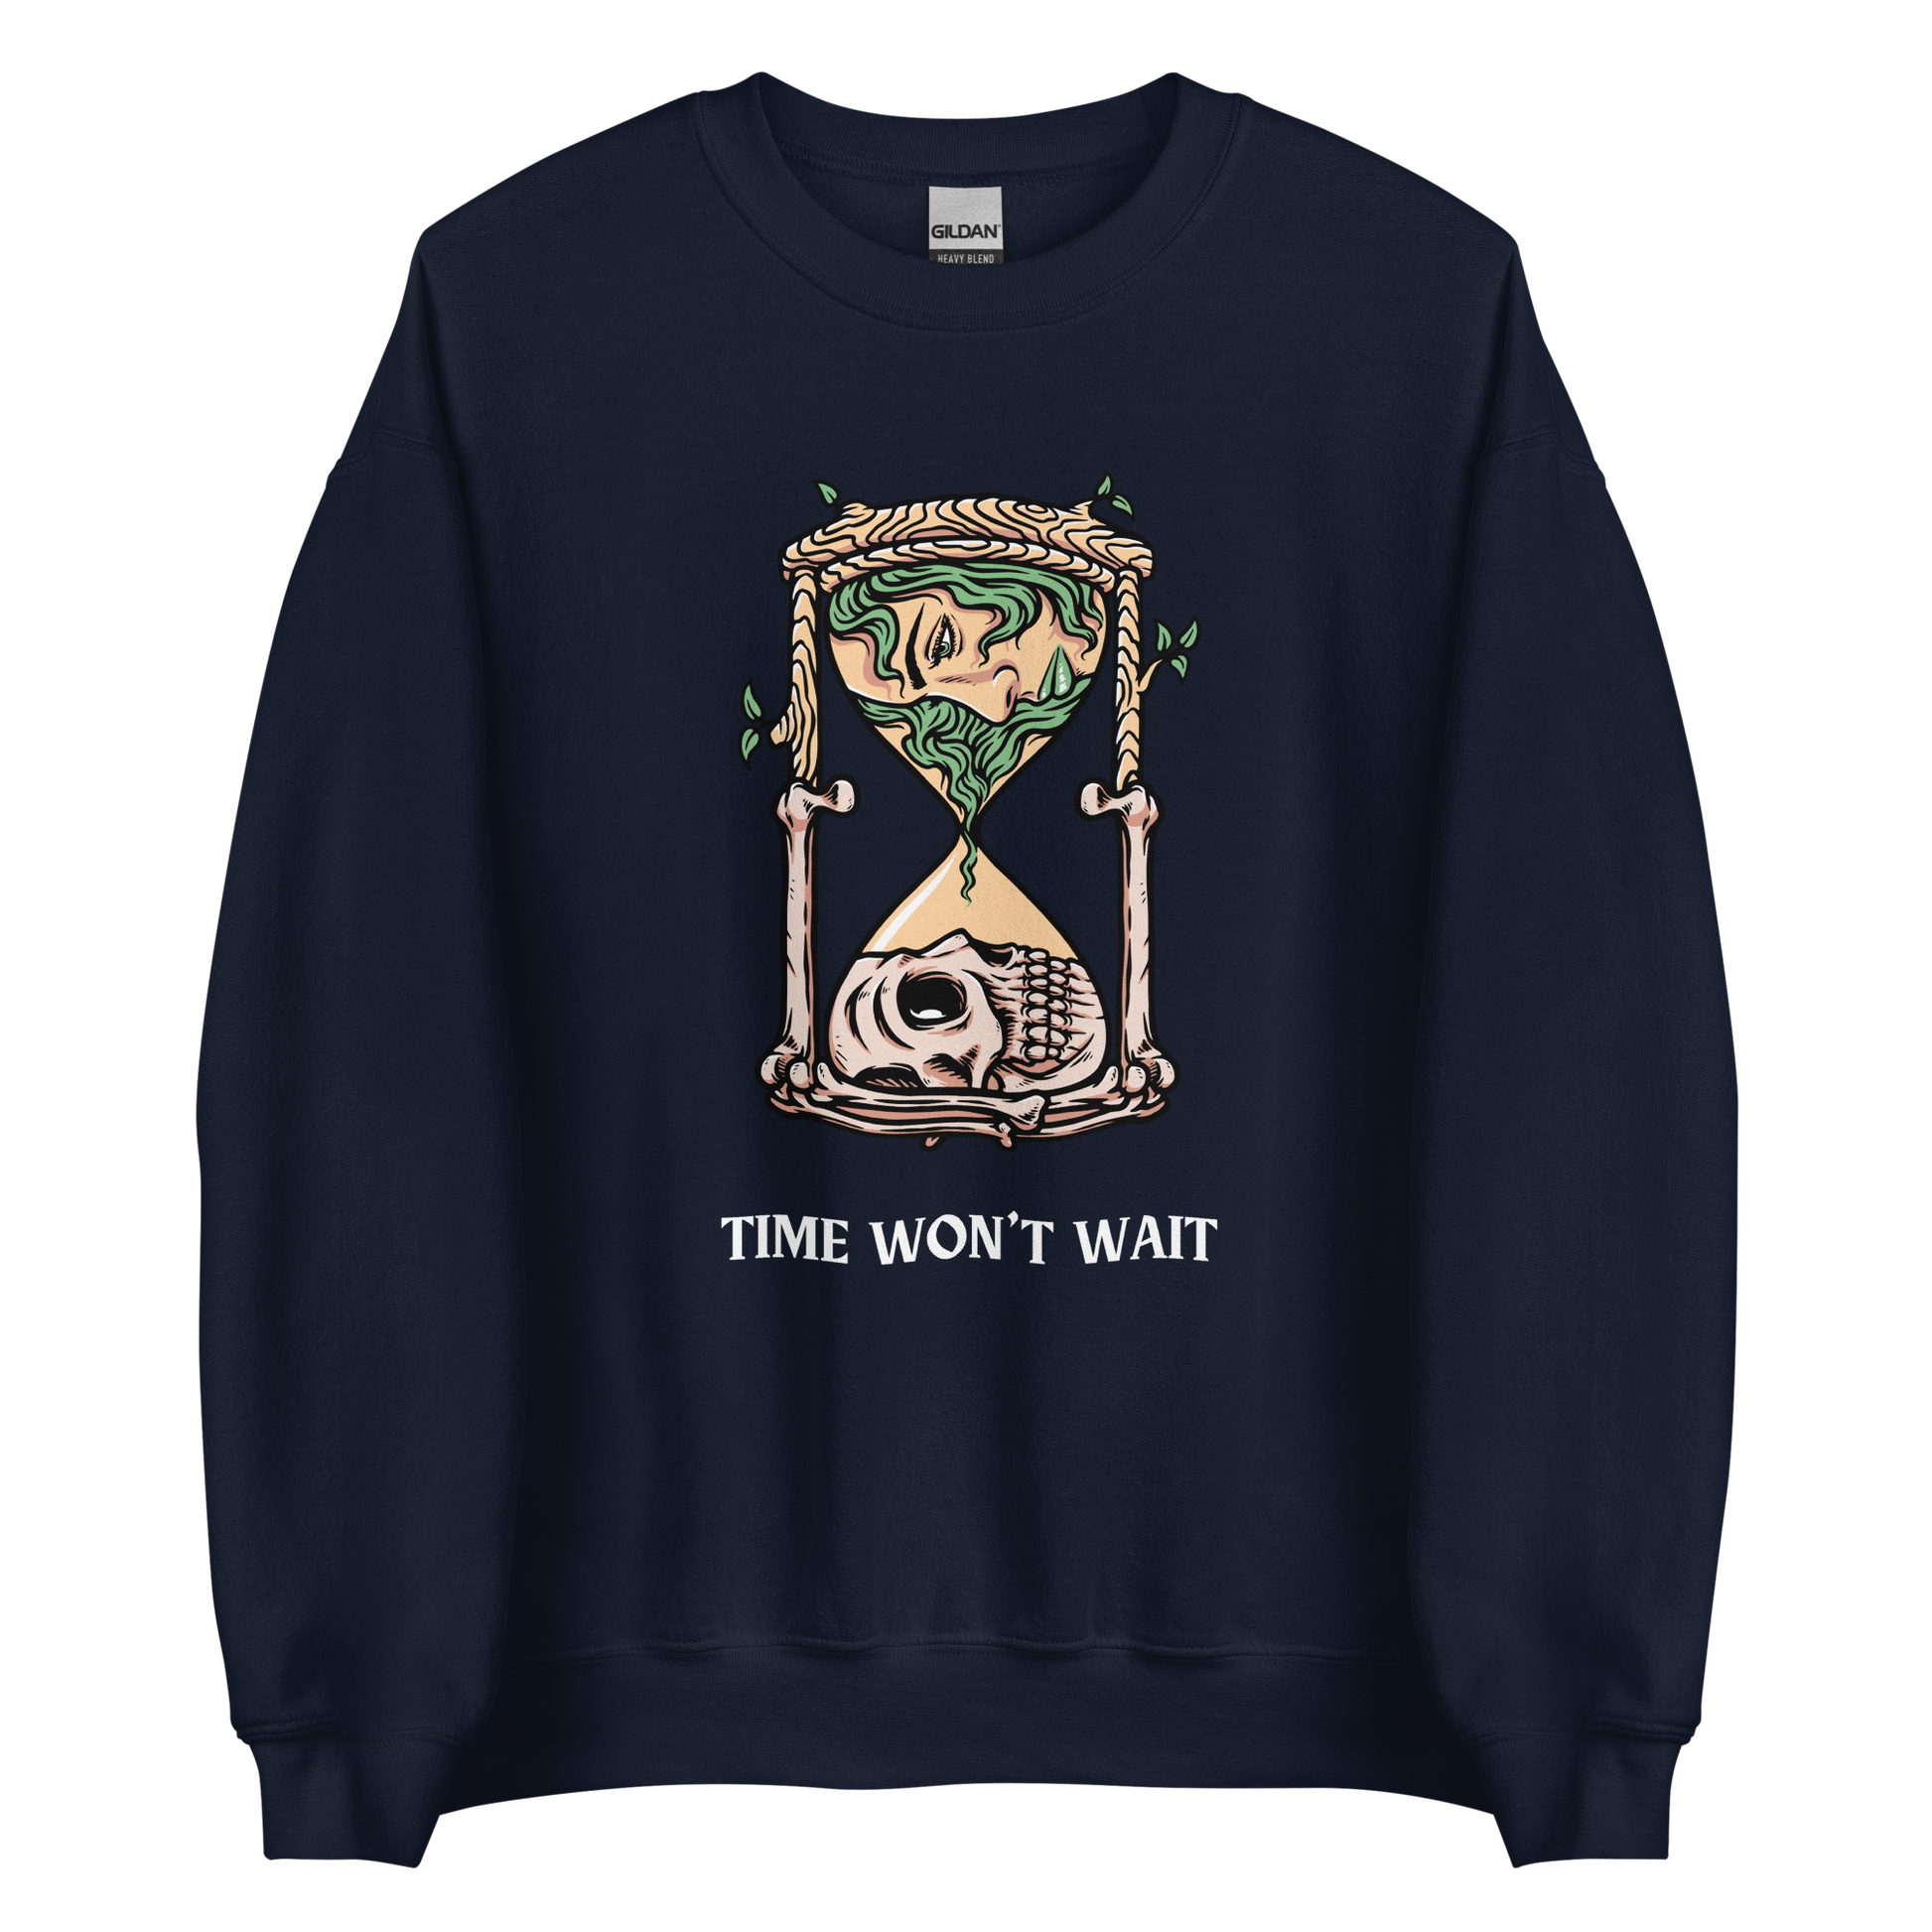 Navy Hourglass Sweatshirt featuring a captivating Time Won't Wait graphic on the chest - Cool Graphic Hourglass Sweatshirts - Boozy Fox